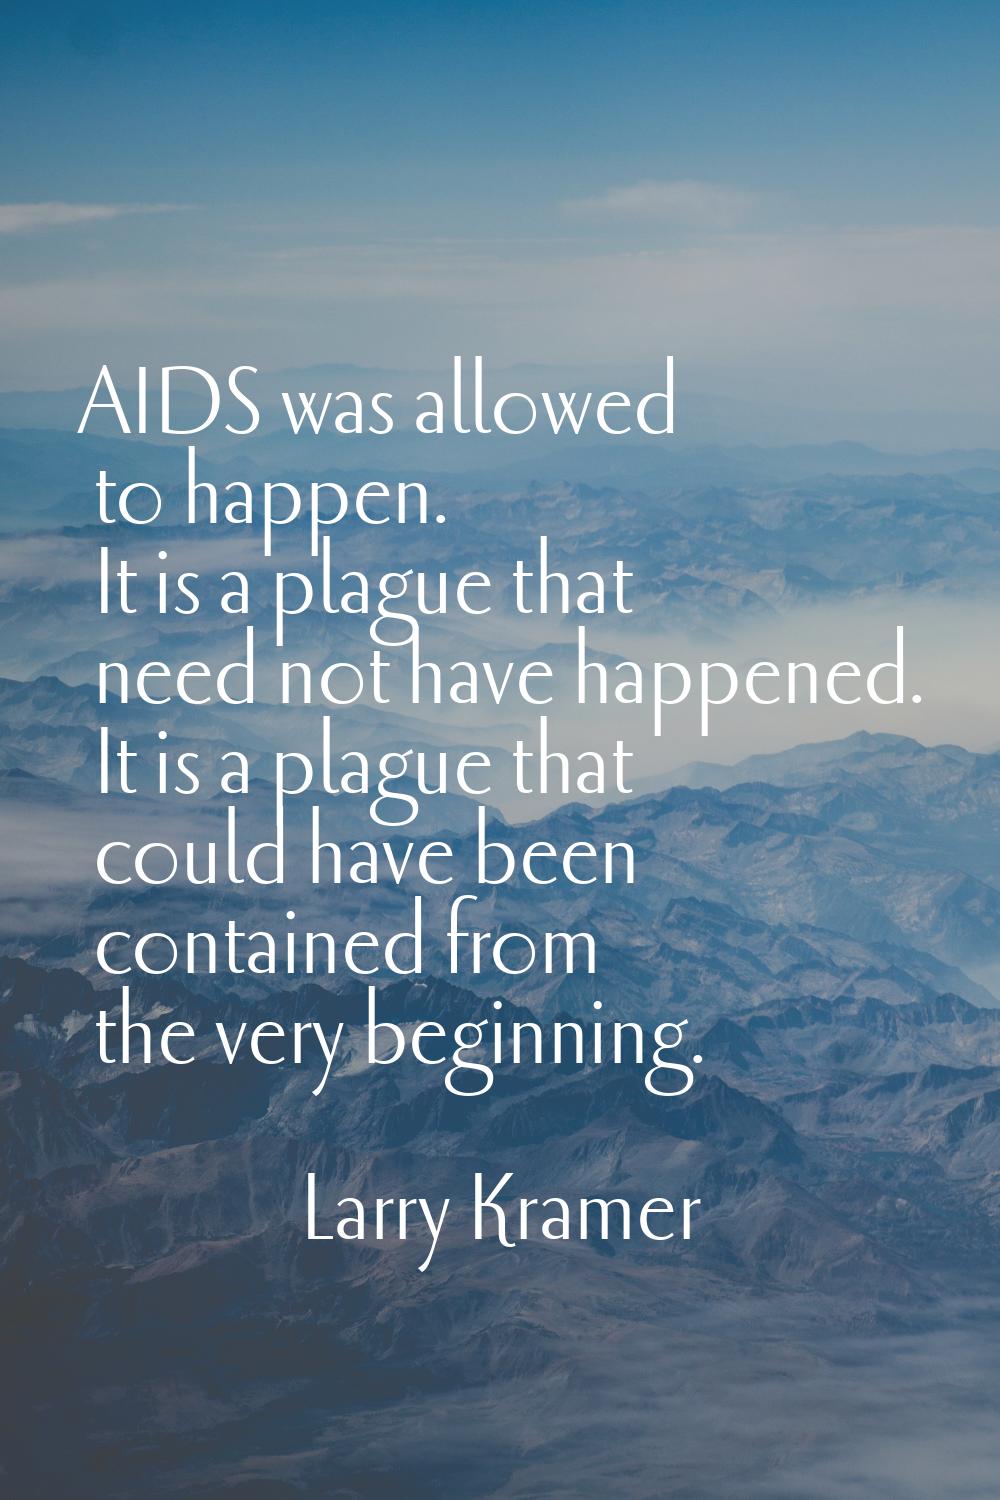 AIDS was allowed to happen. It is a plague that need not have happened. It is a plague that could h